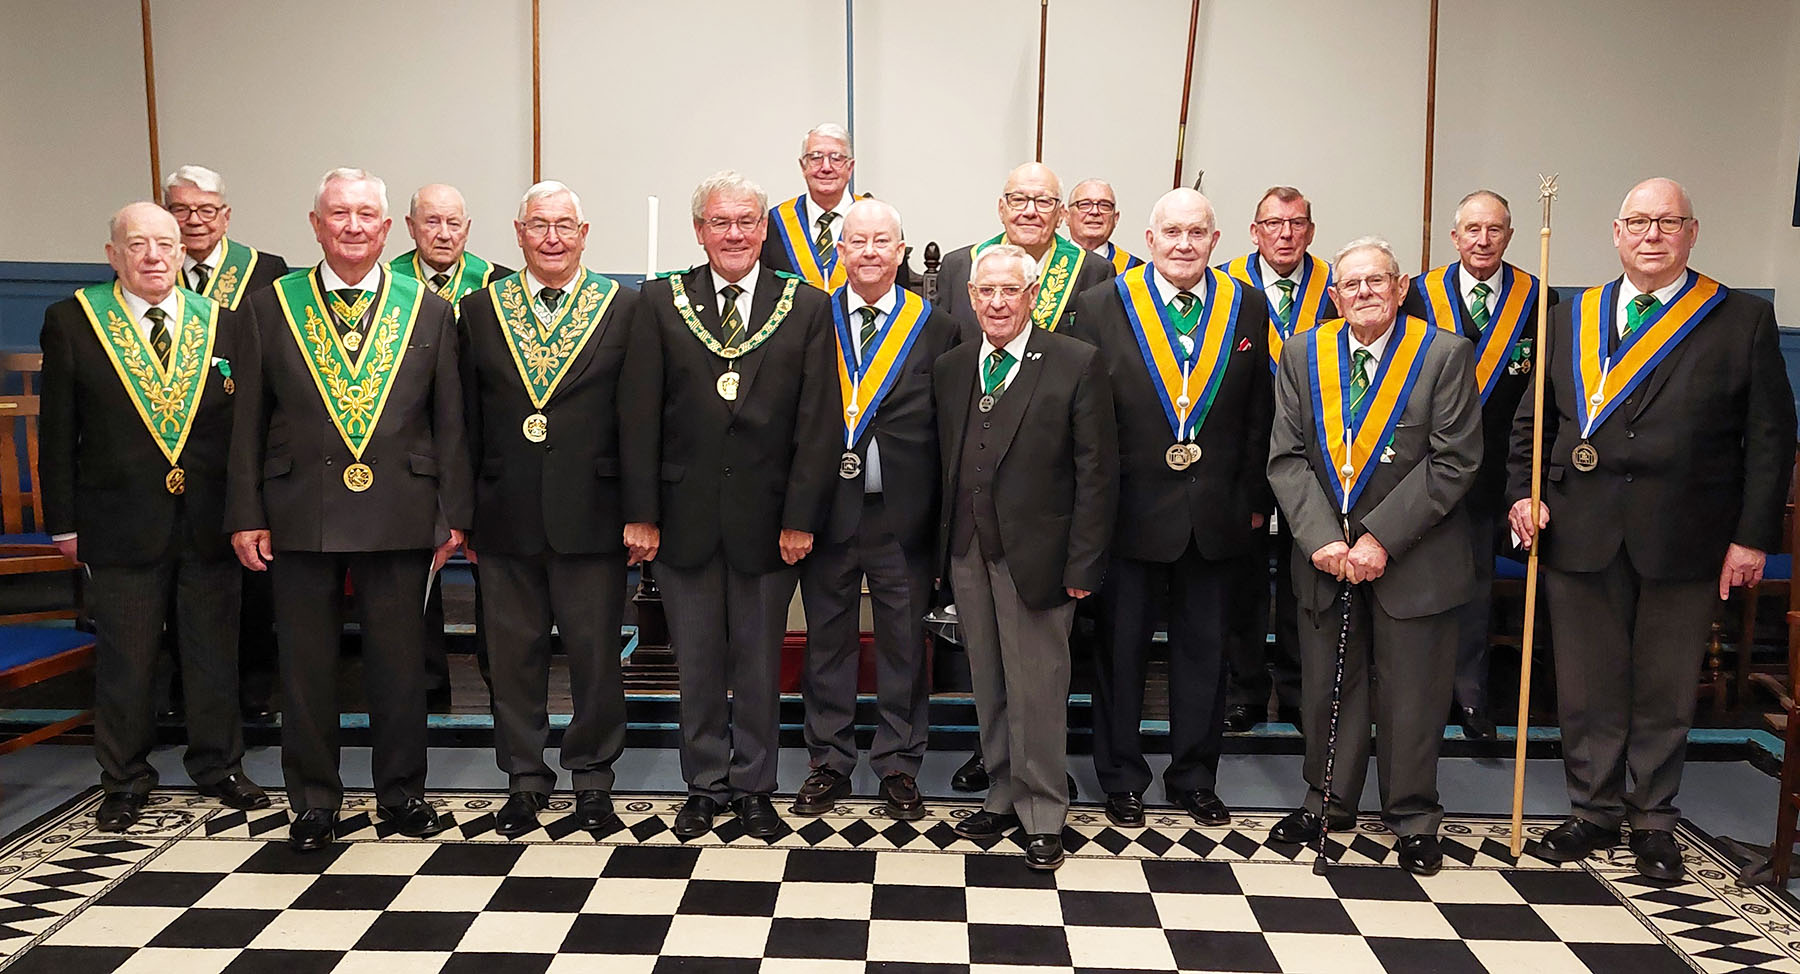 The Brethren of Paddock Wood Council with the D.G.P. and visitors